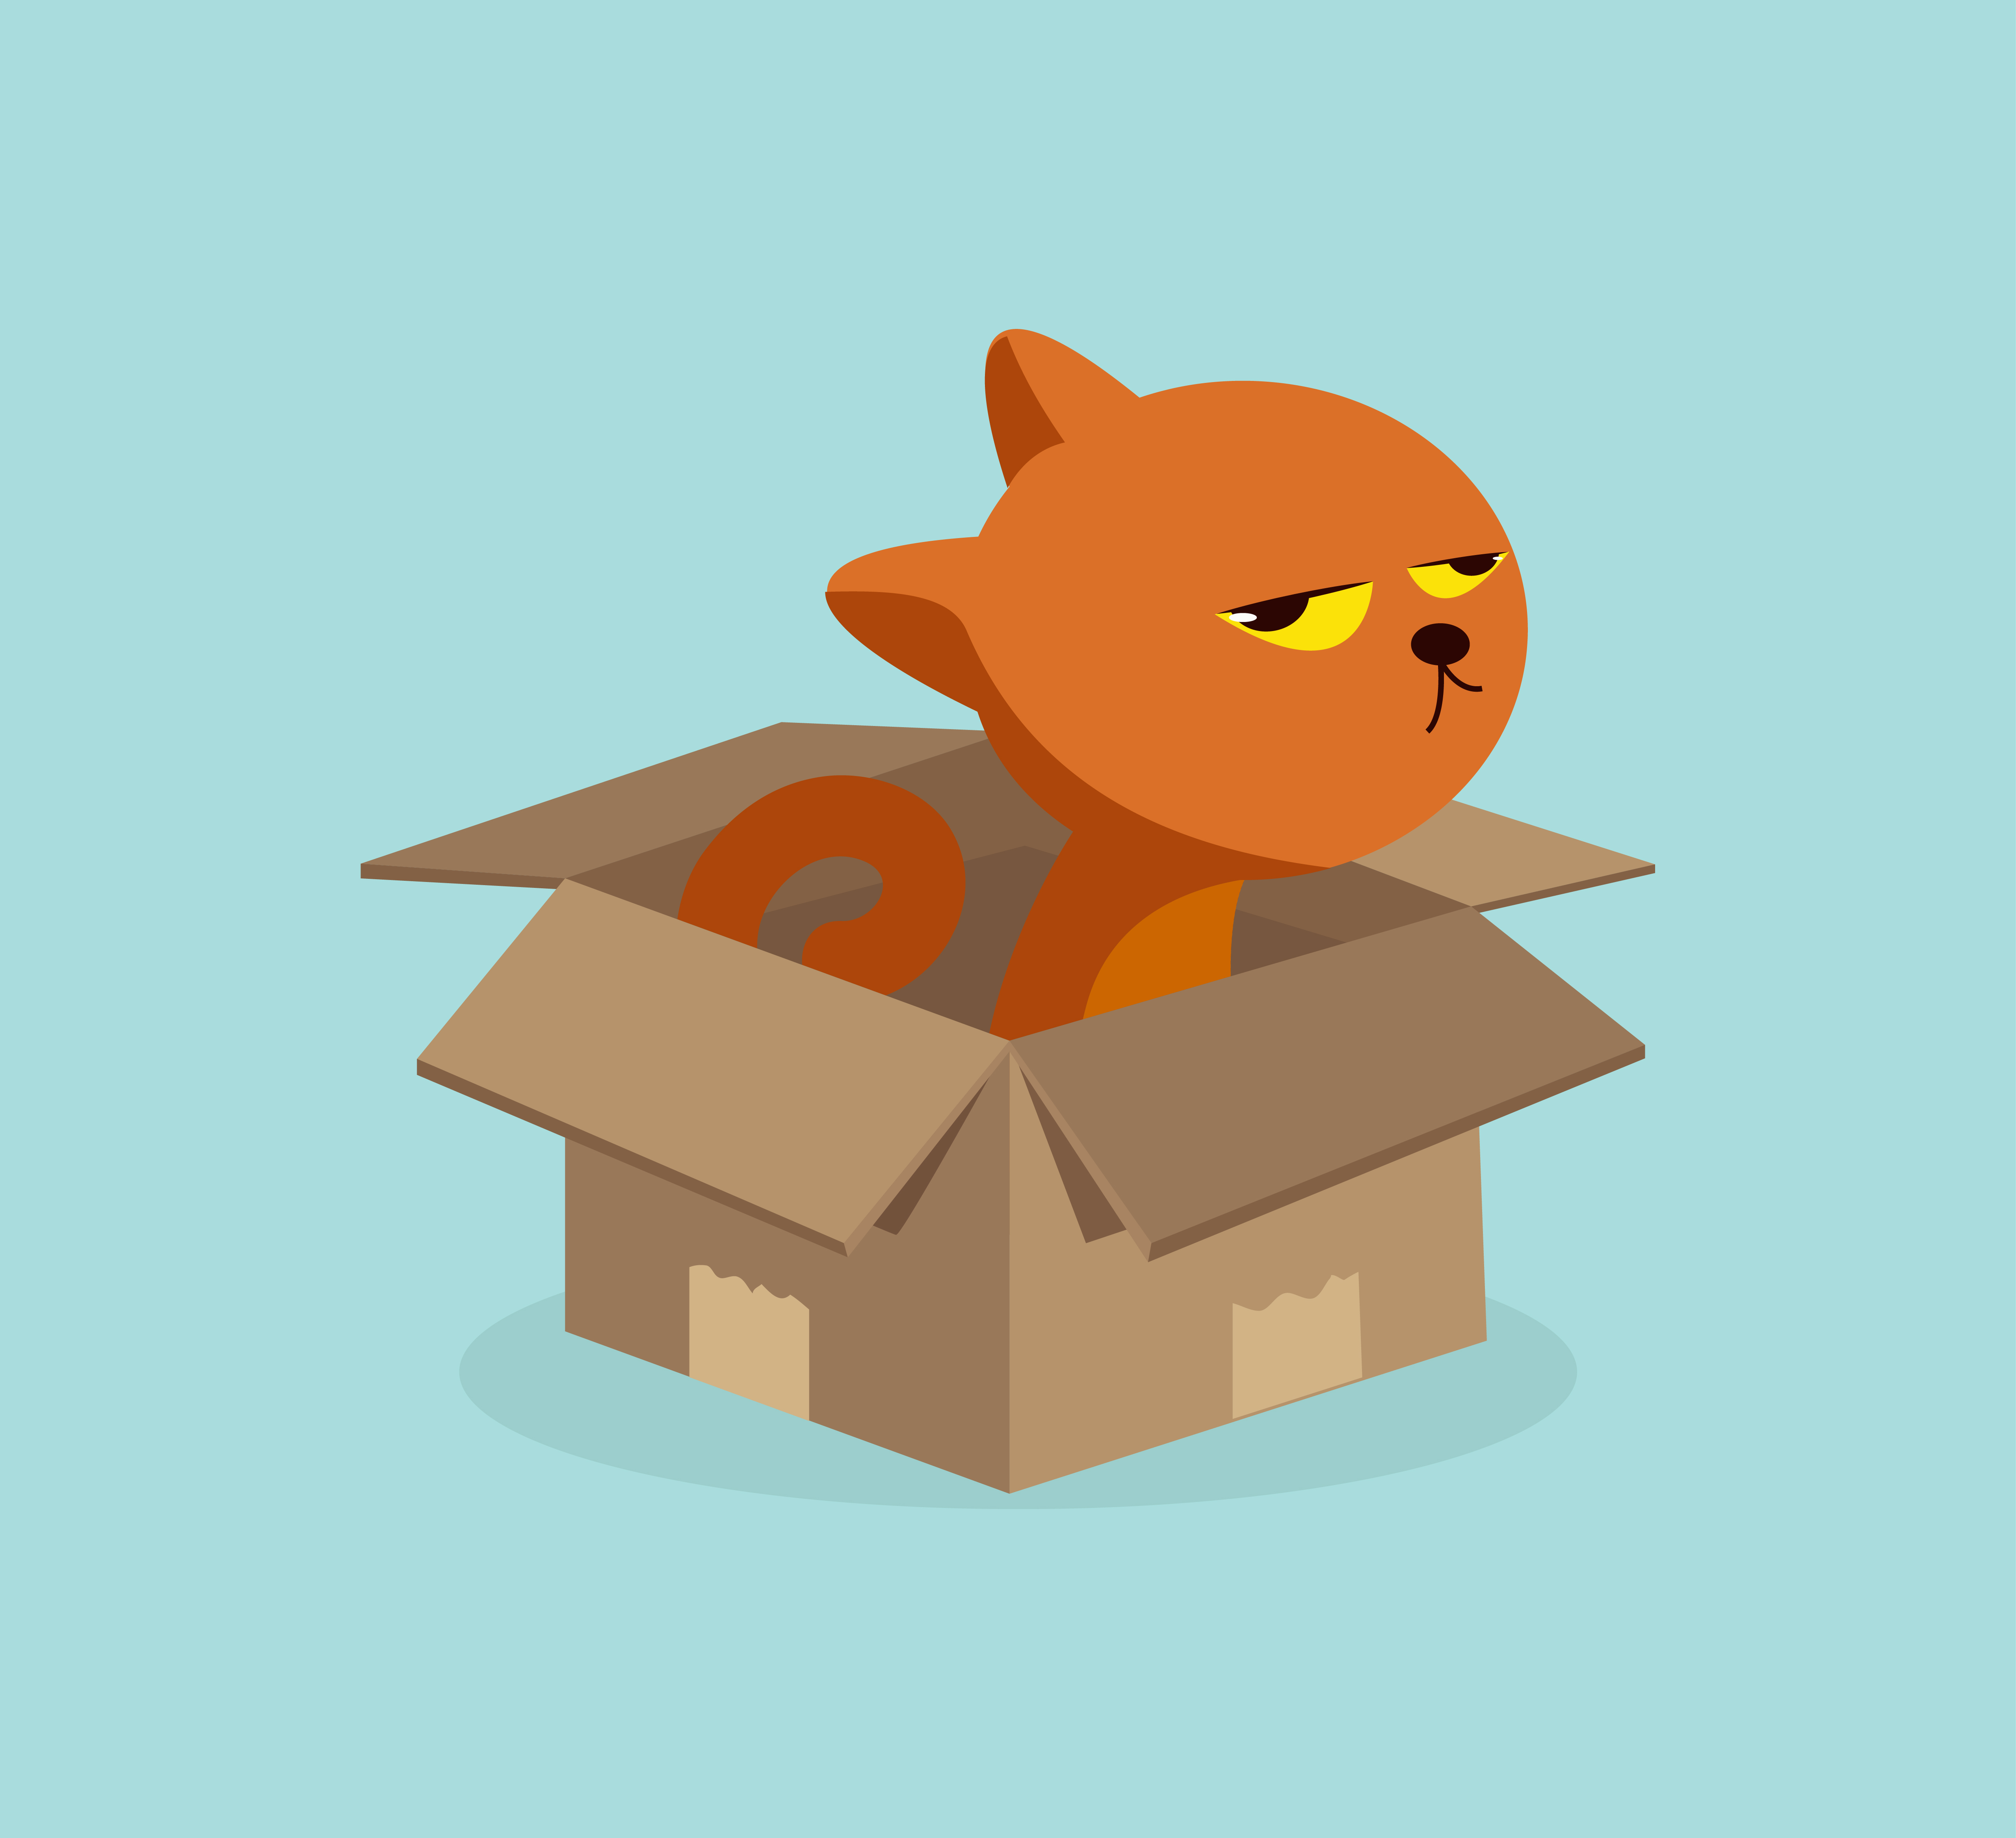 Download the Grumpy red cat sitting in a cardboard box 1735163